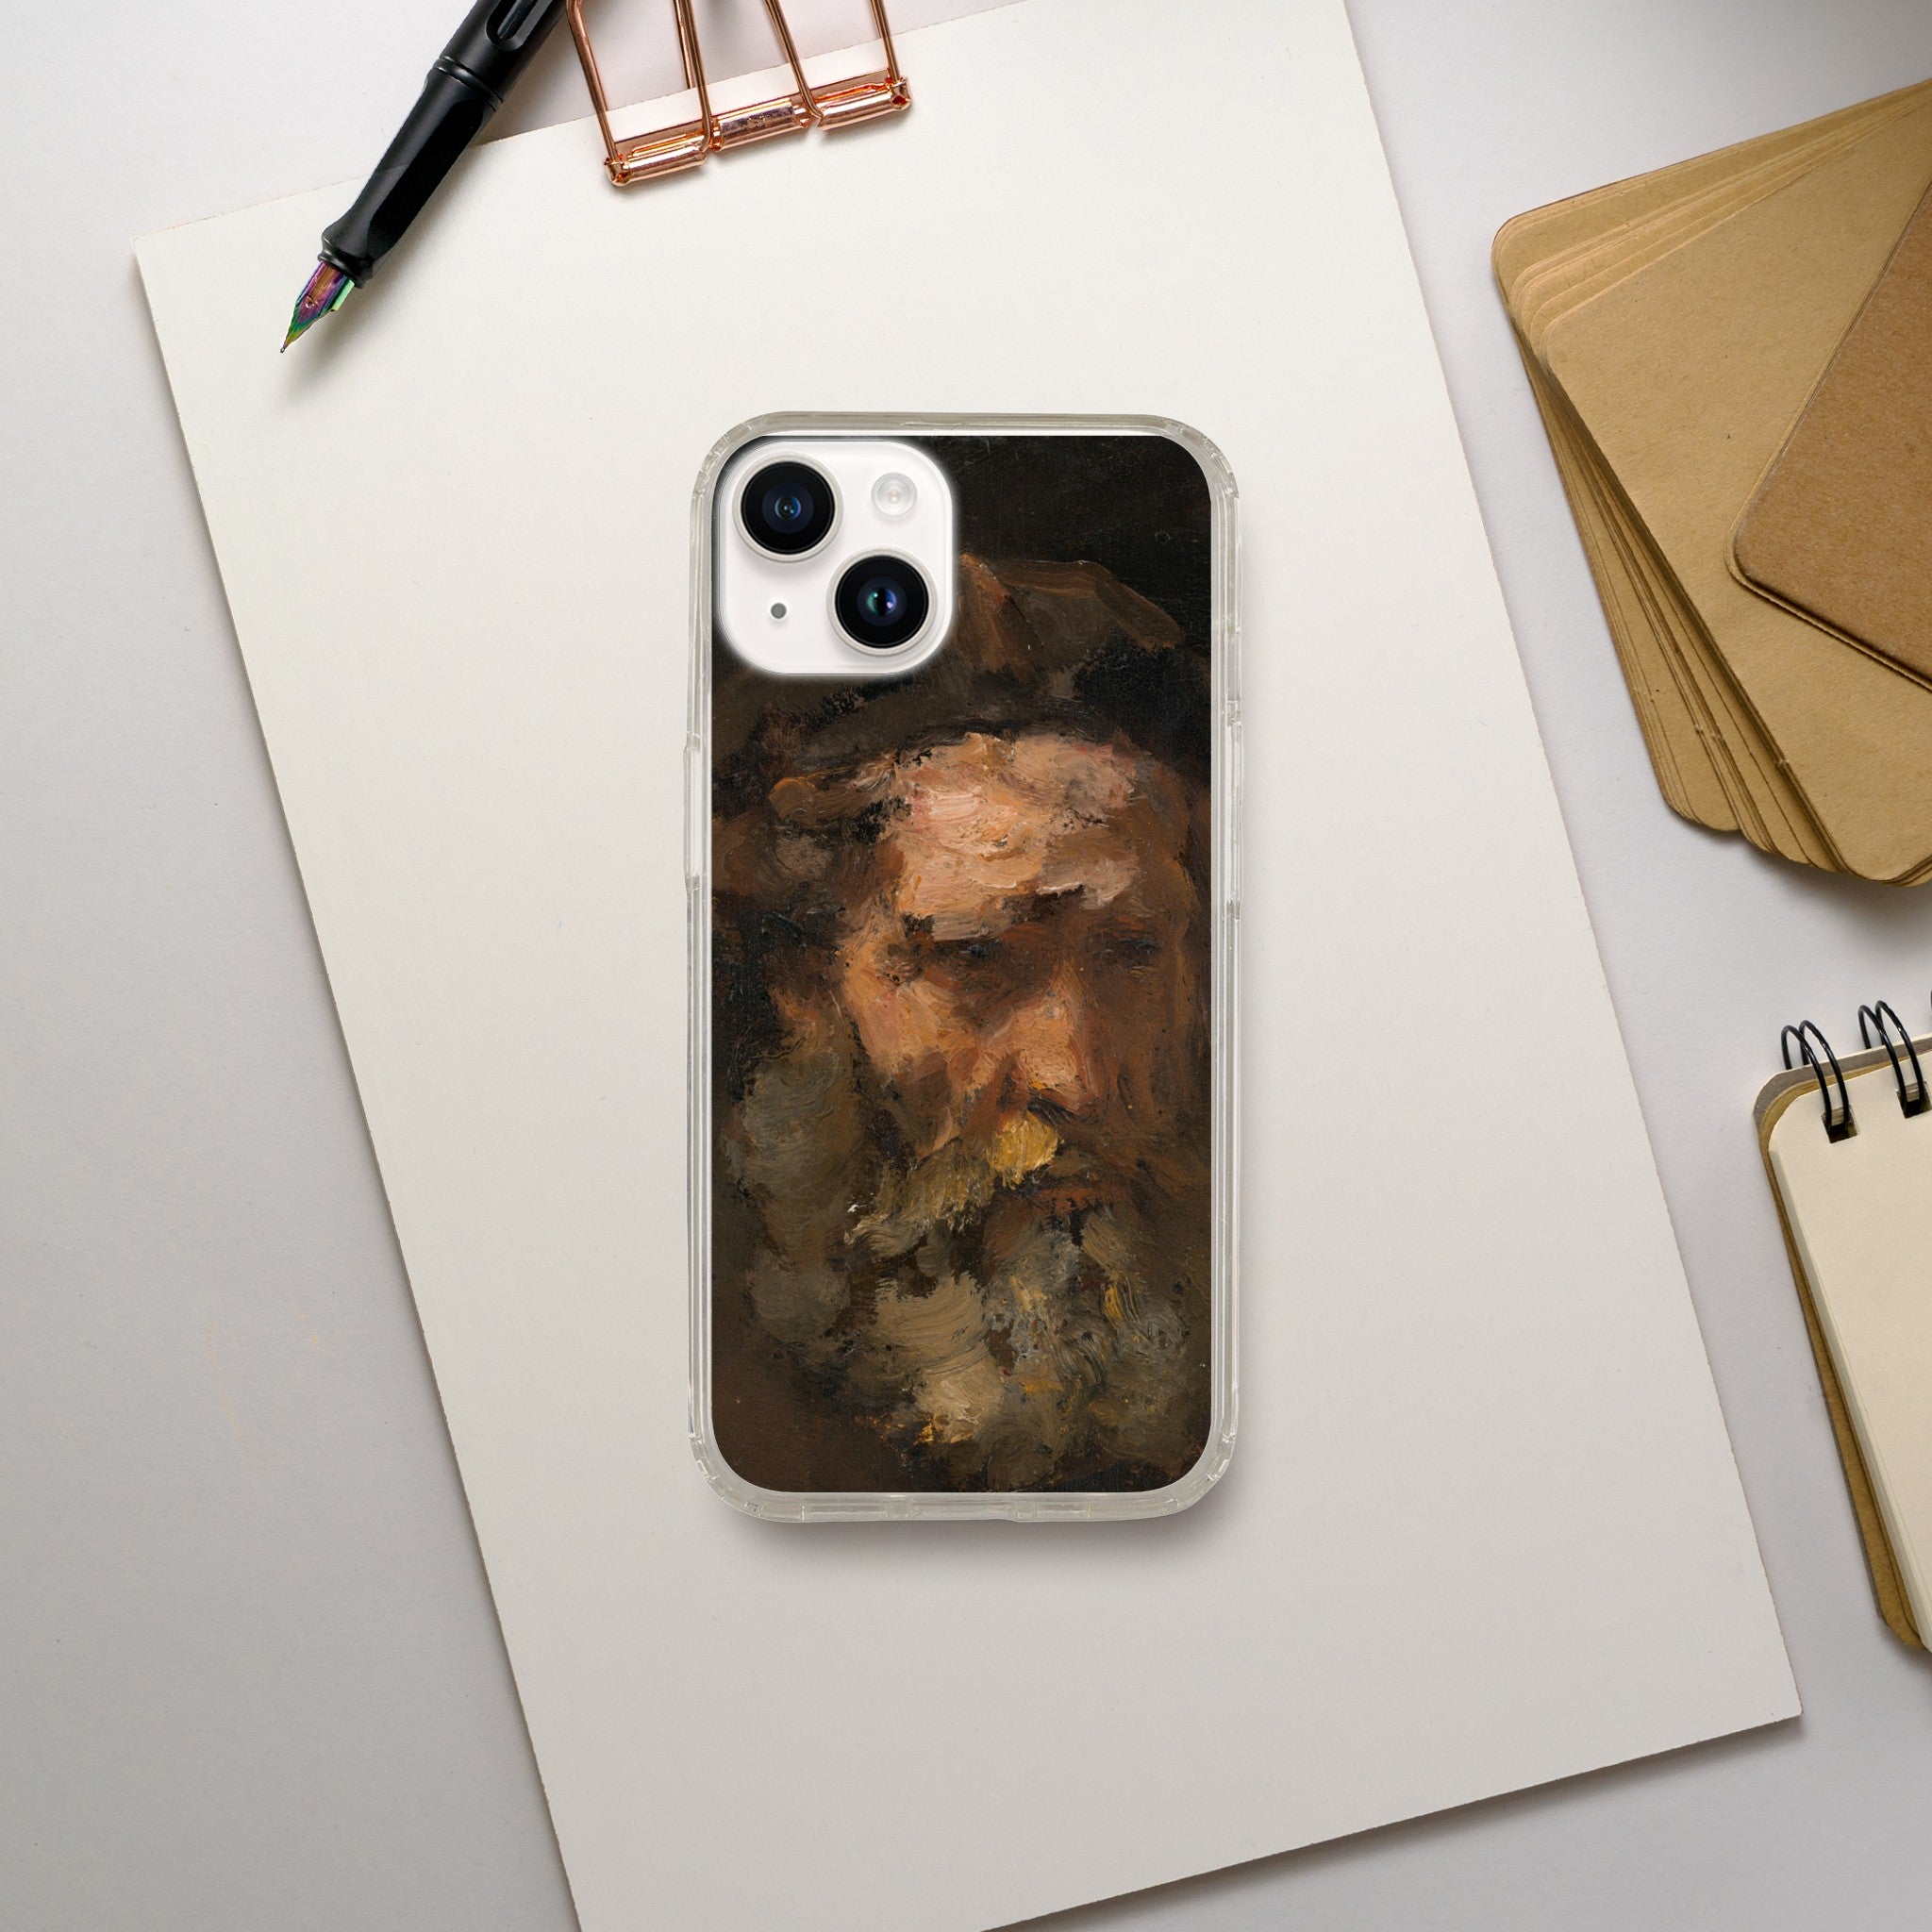 Painted Man I-phone Case - Clear case